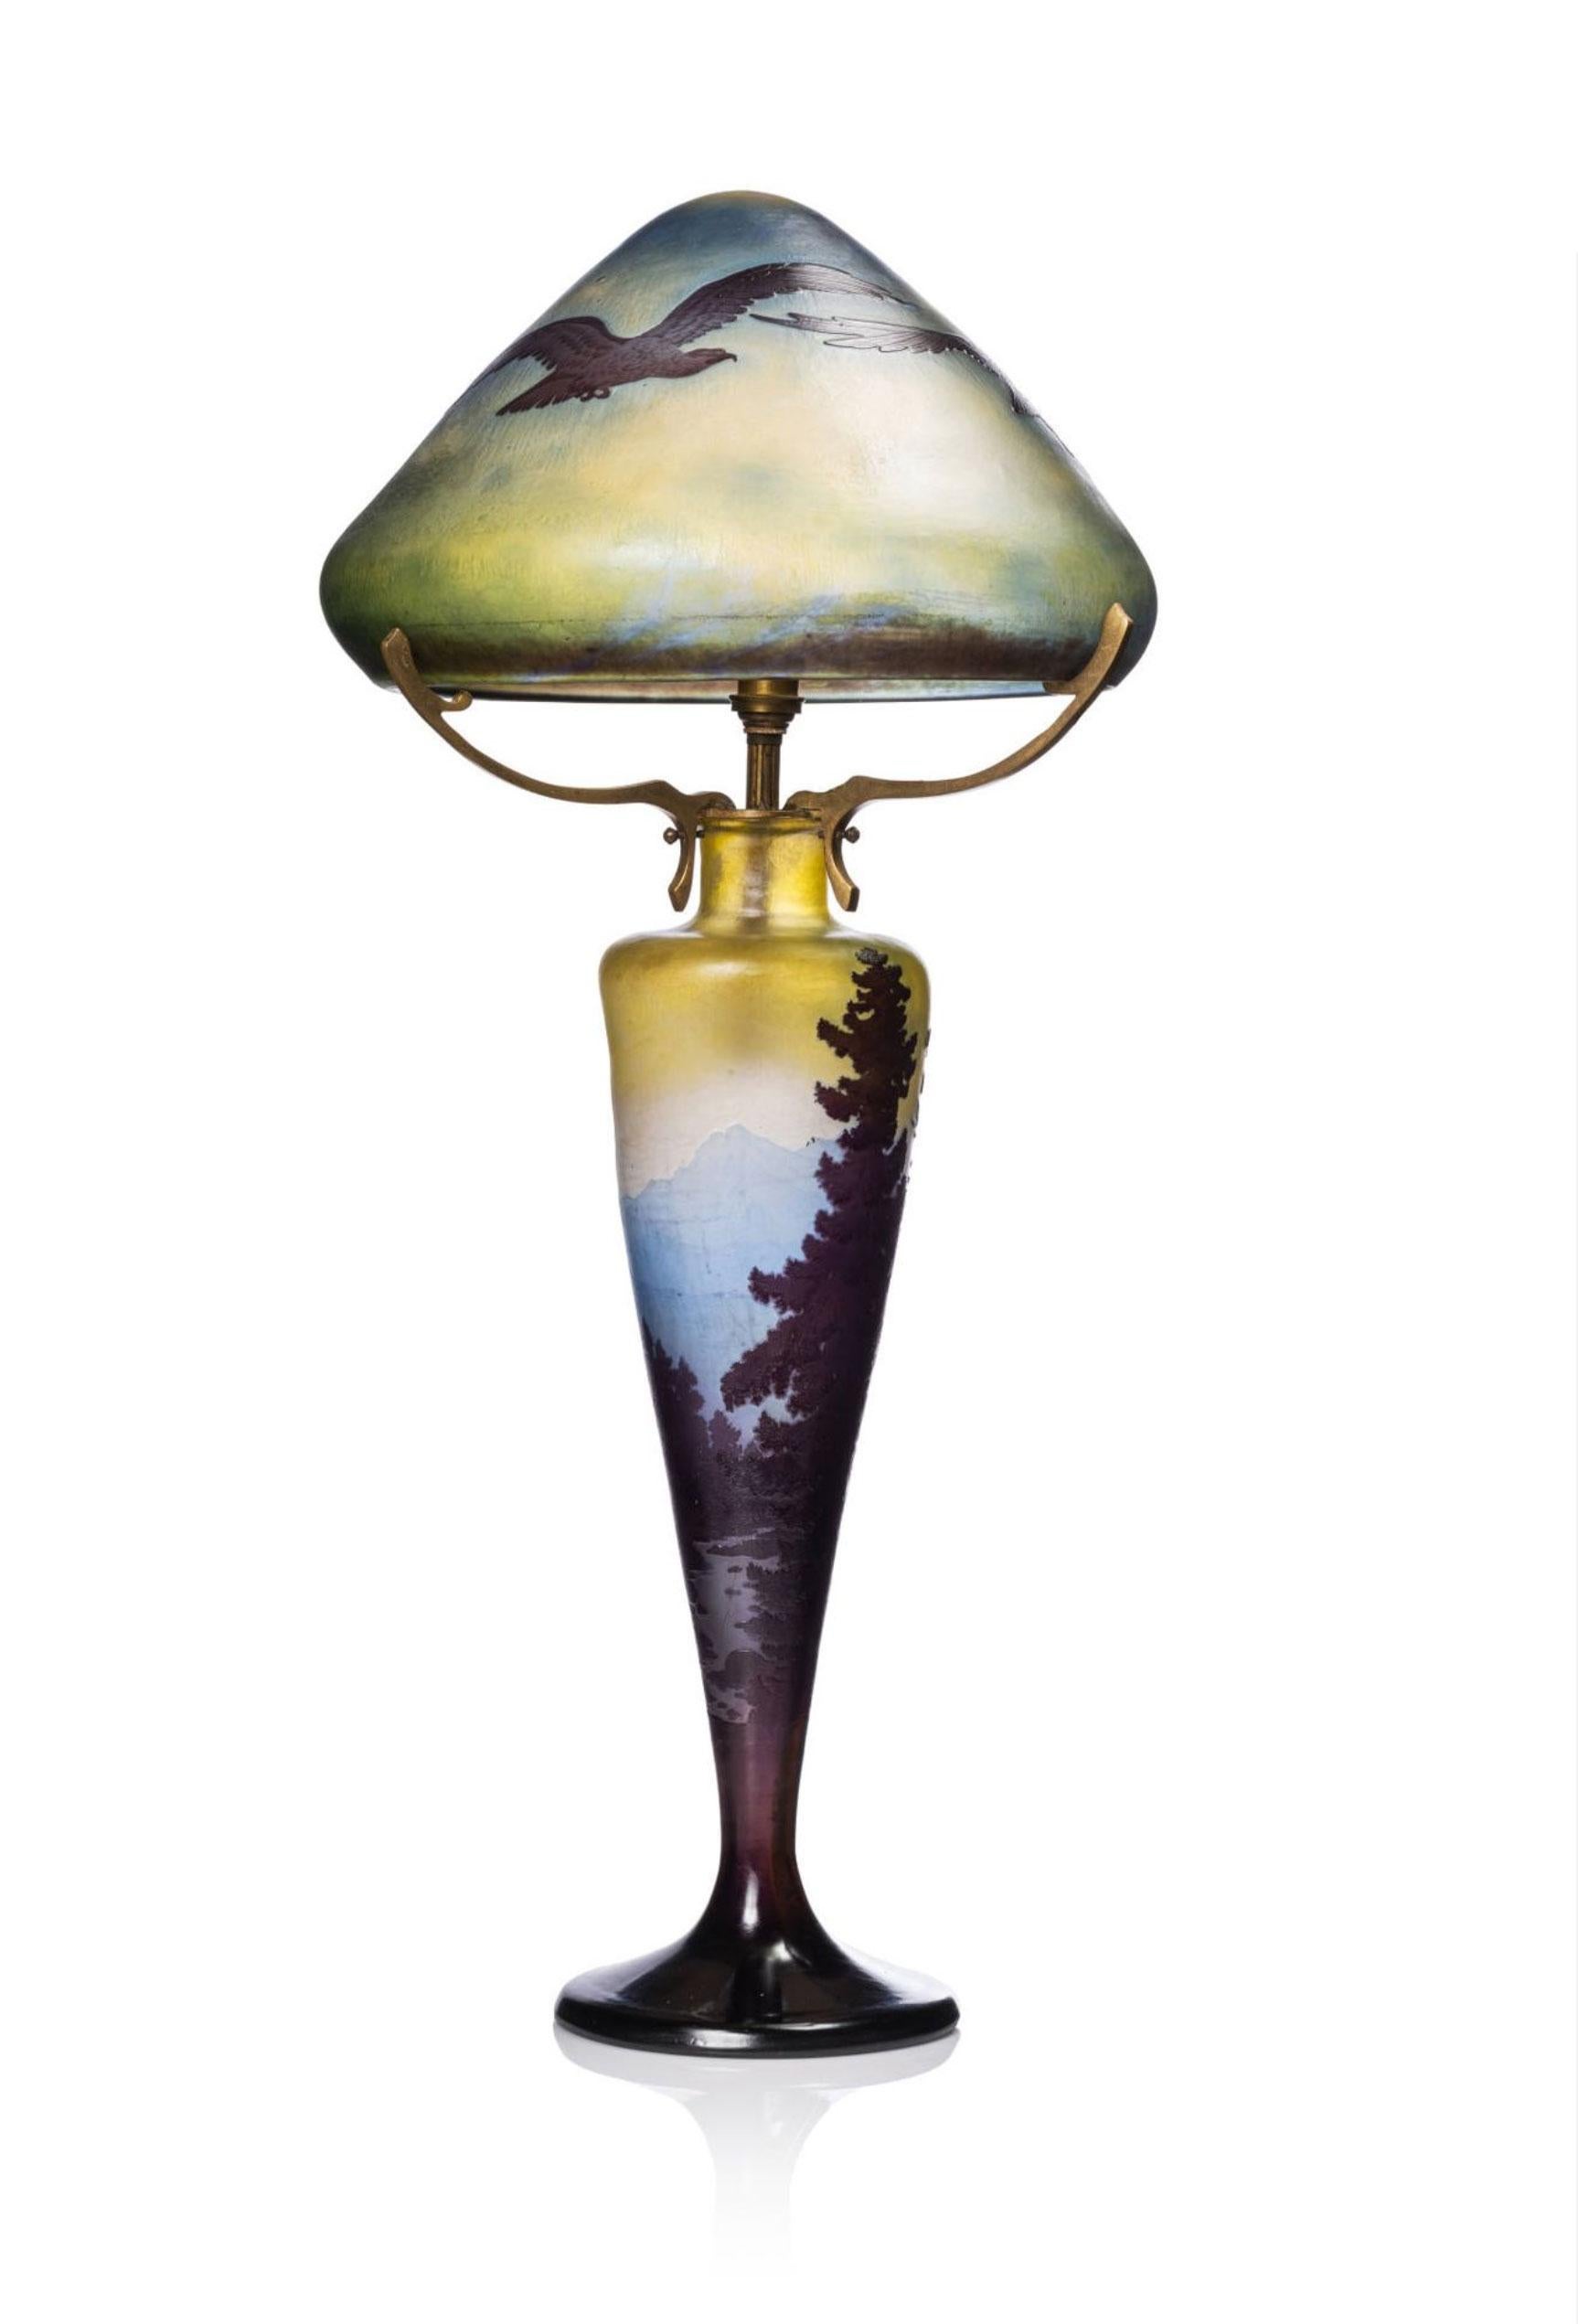 French Art Nouveau Table Lamp by Emile Galle ''Vosges Paysage'' Cameo Glass 1900 In Good Condition For Sale In Ijzendijke, NL